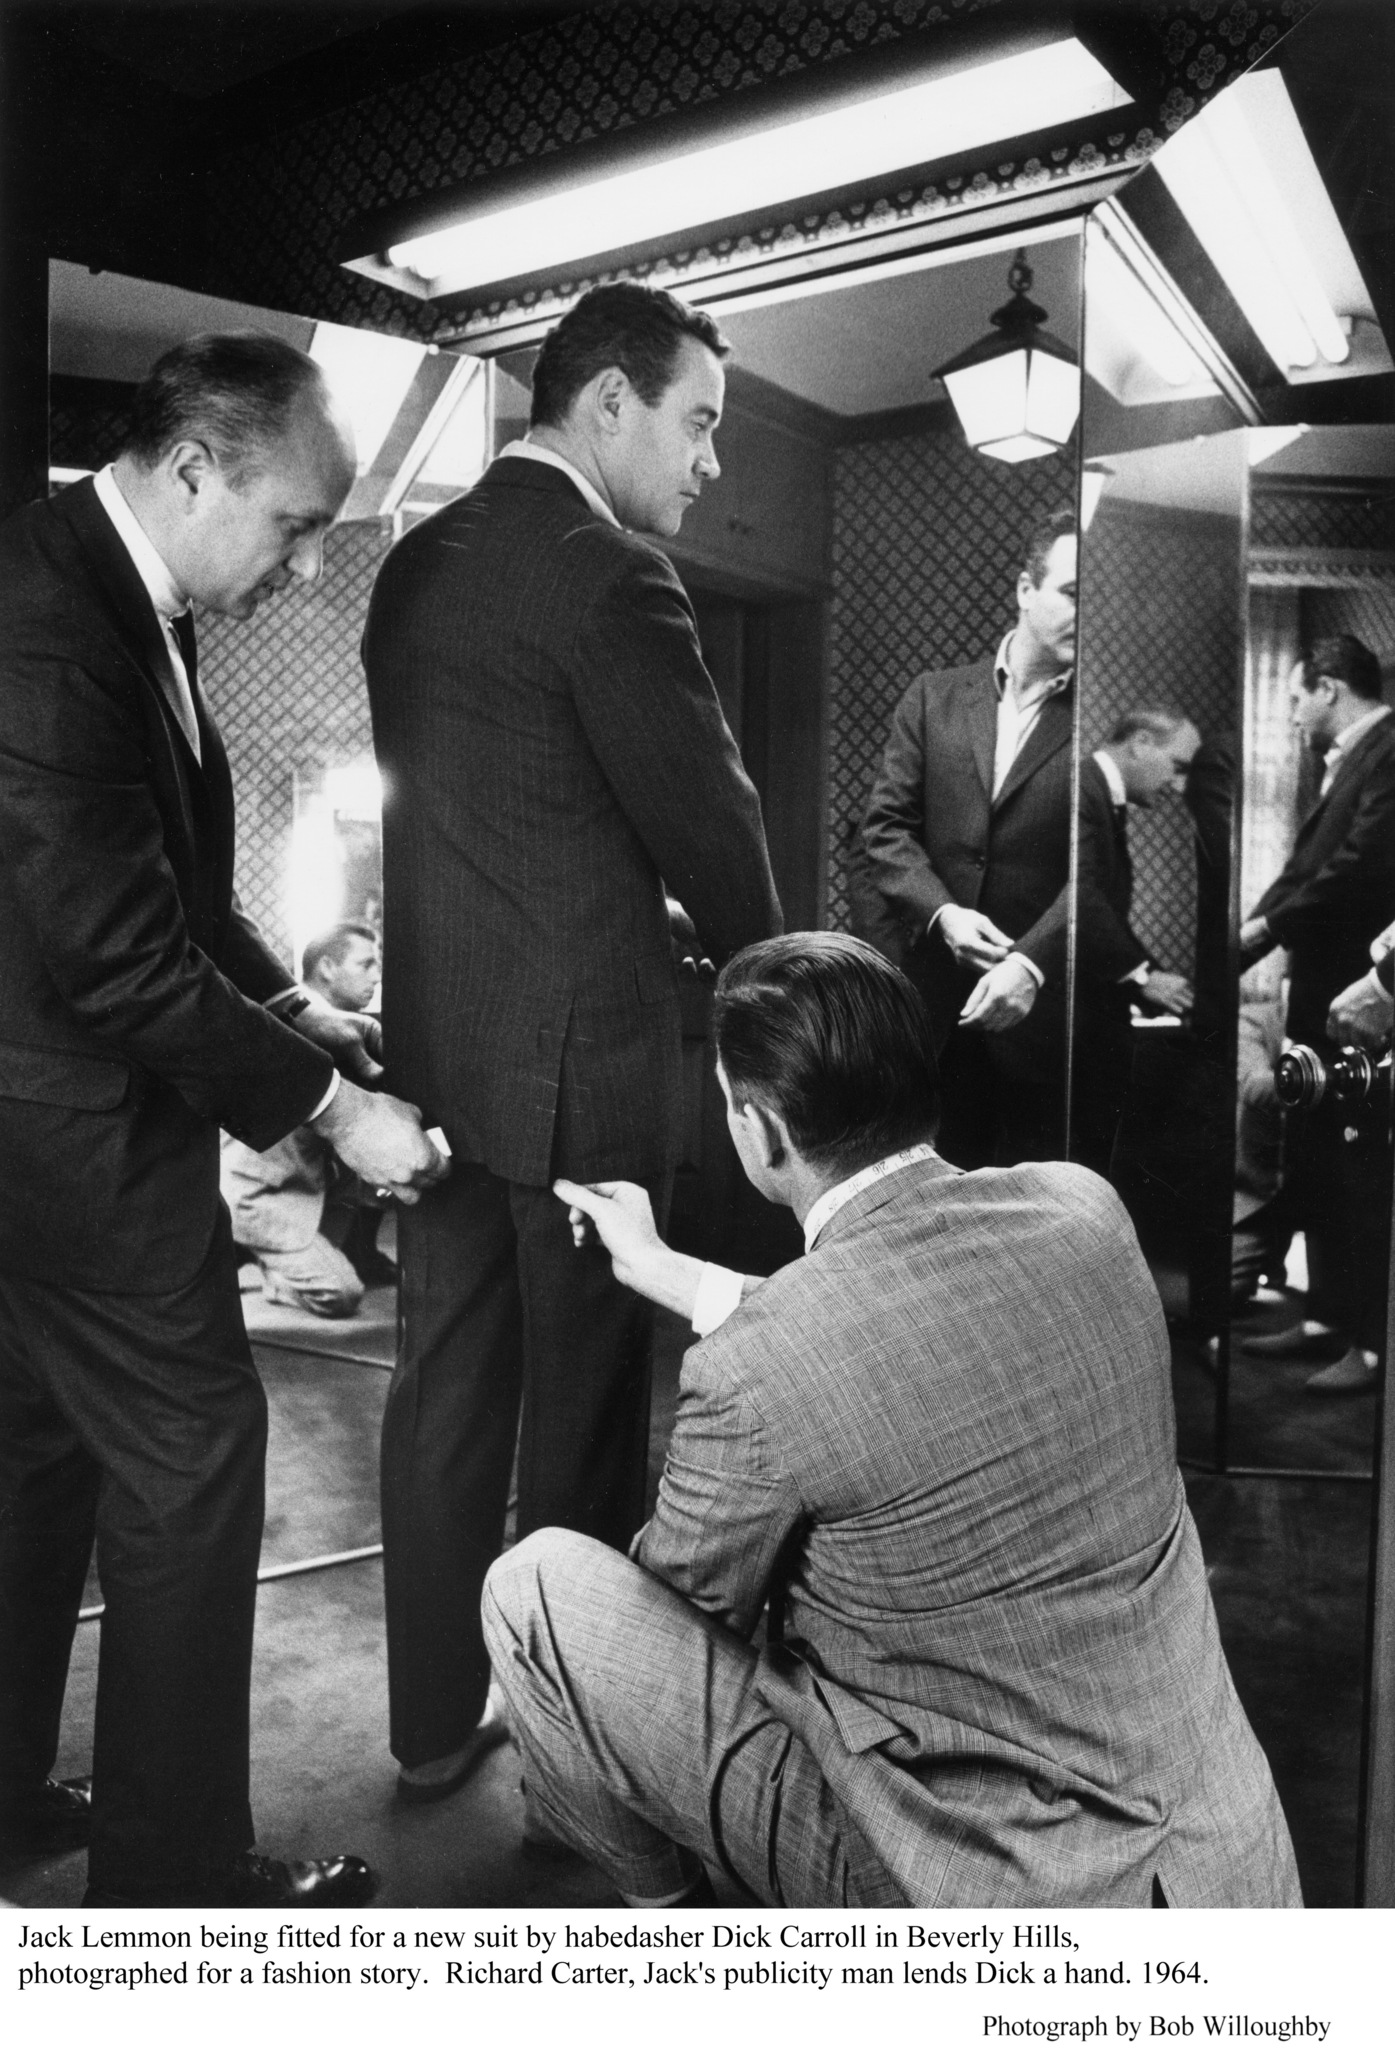 Jack Lemmon being fitted for a new dresser by habedasher Dick Carroll and his publicist Richard Carter, 1964.